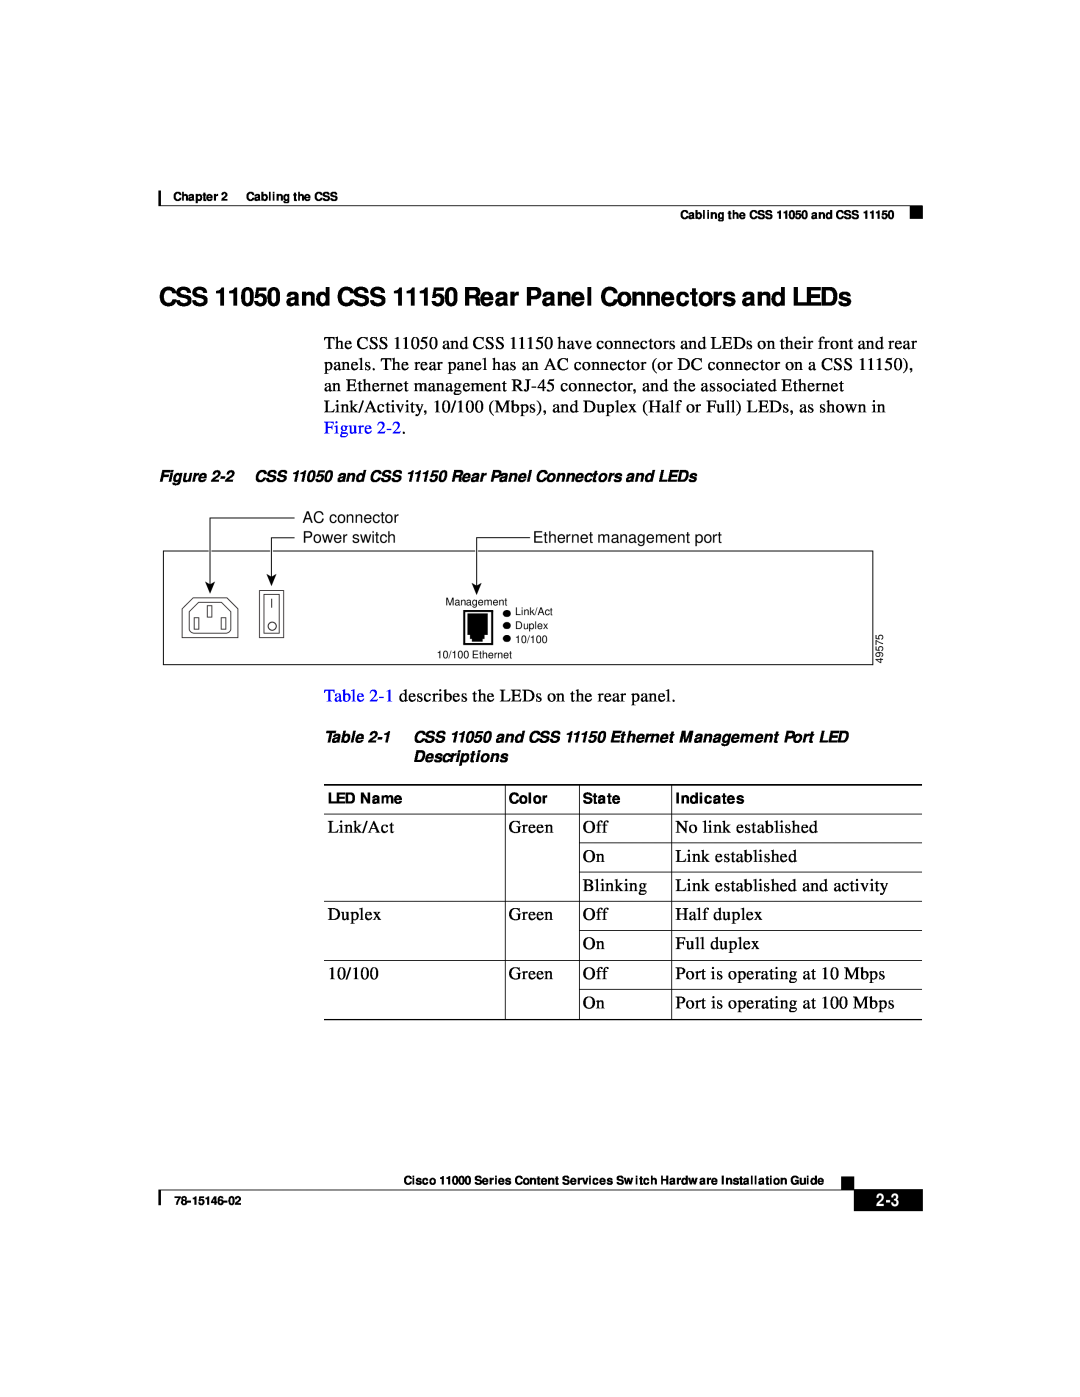 Cisco Systems 11000 Series manual CSS 11050 and CSS 11150 Rear Panel Connectors and LEDs, LED Name, Color, State, Indicates 